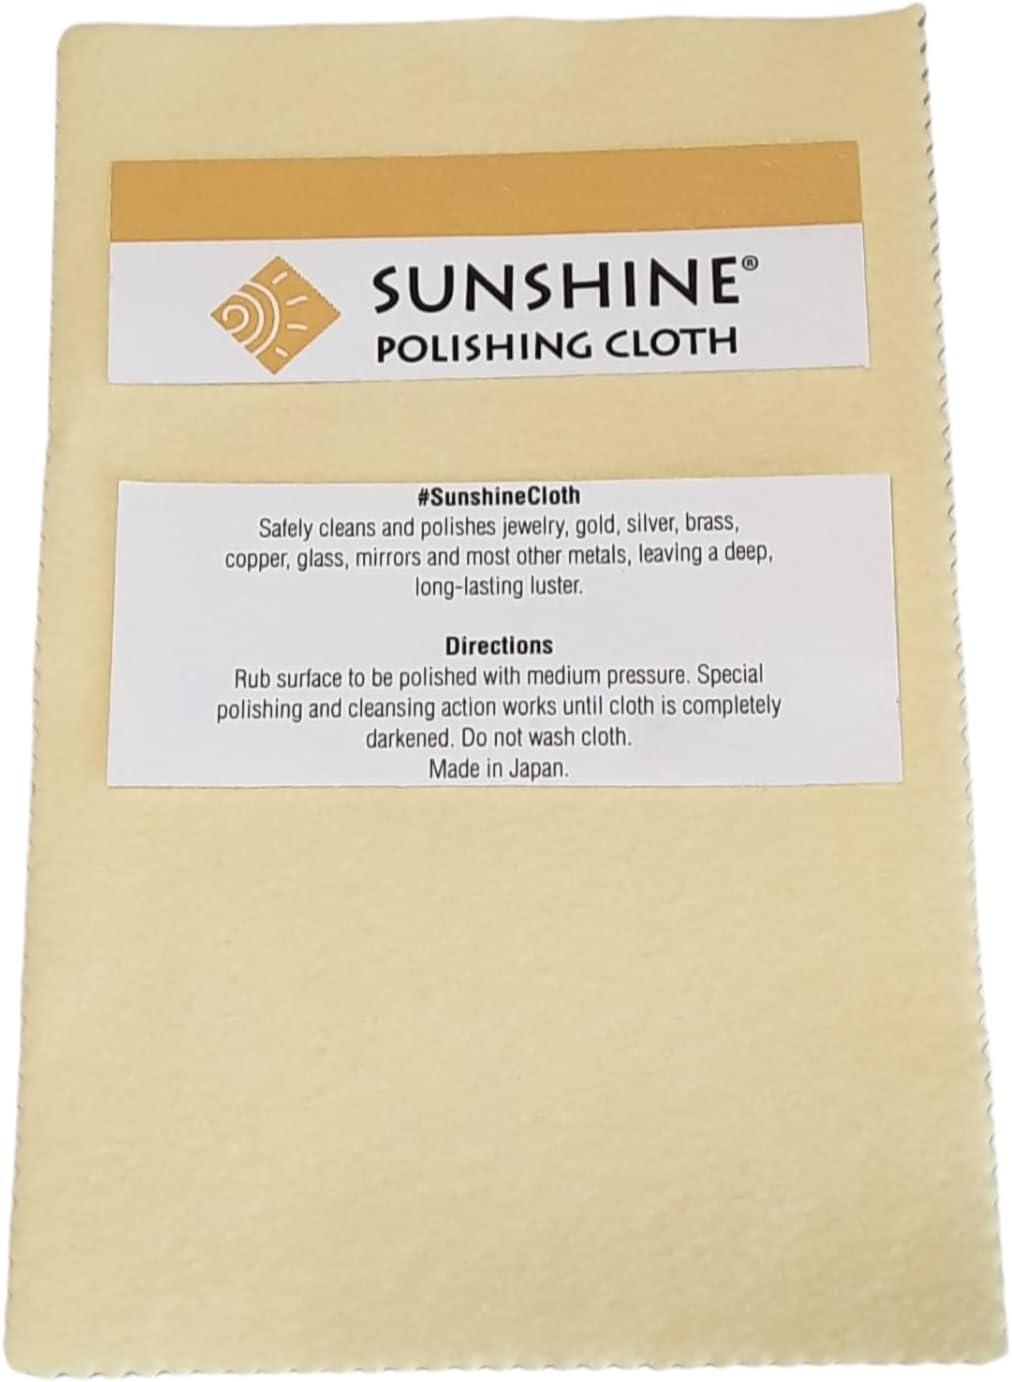 2 Sunshine Polishing Cloth for Sterling Silver, Gold, Brass and Copper Jewelry  Polishing Cloth